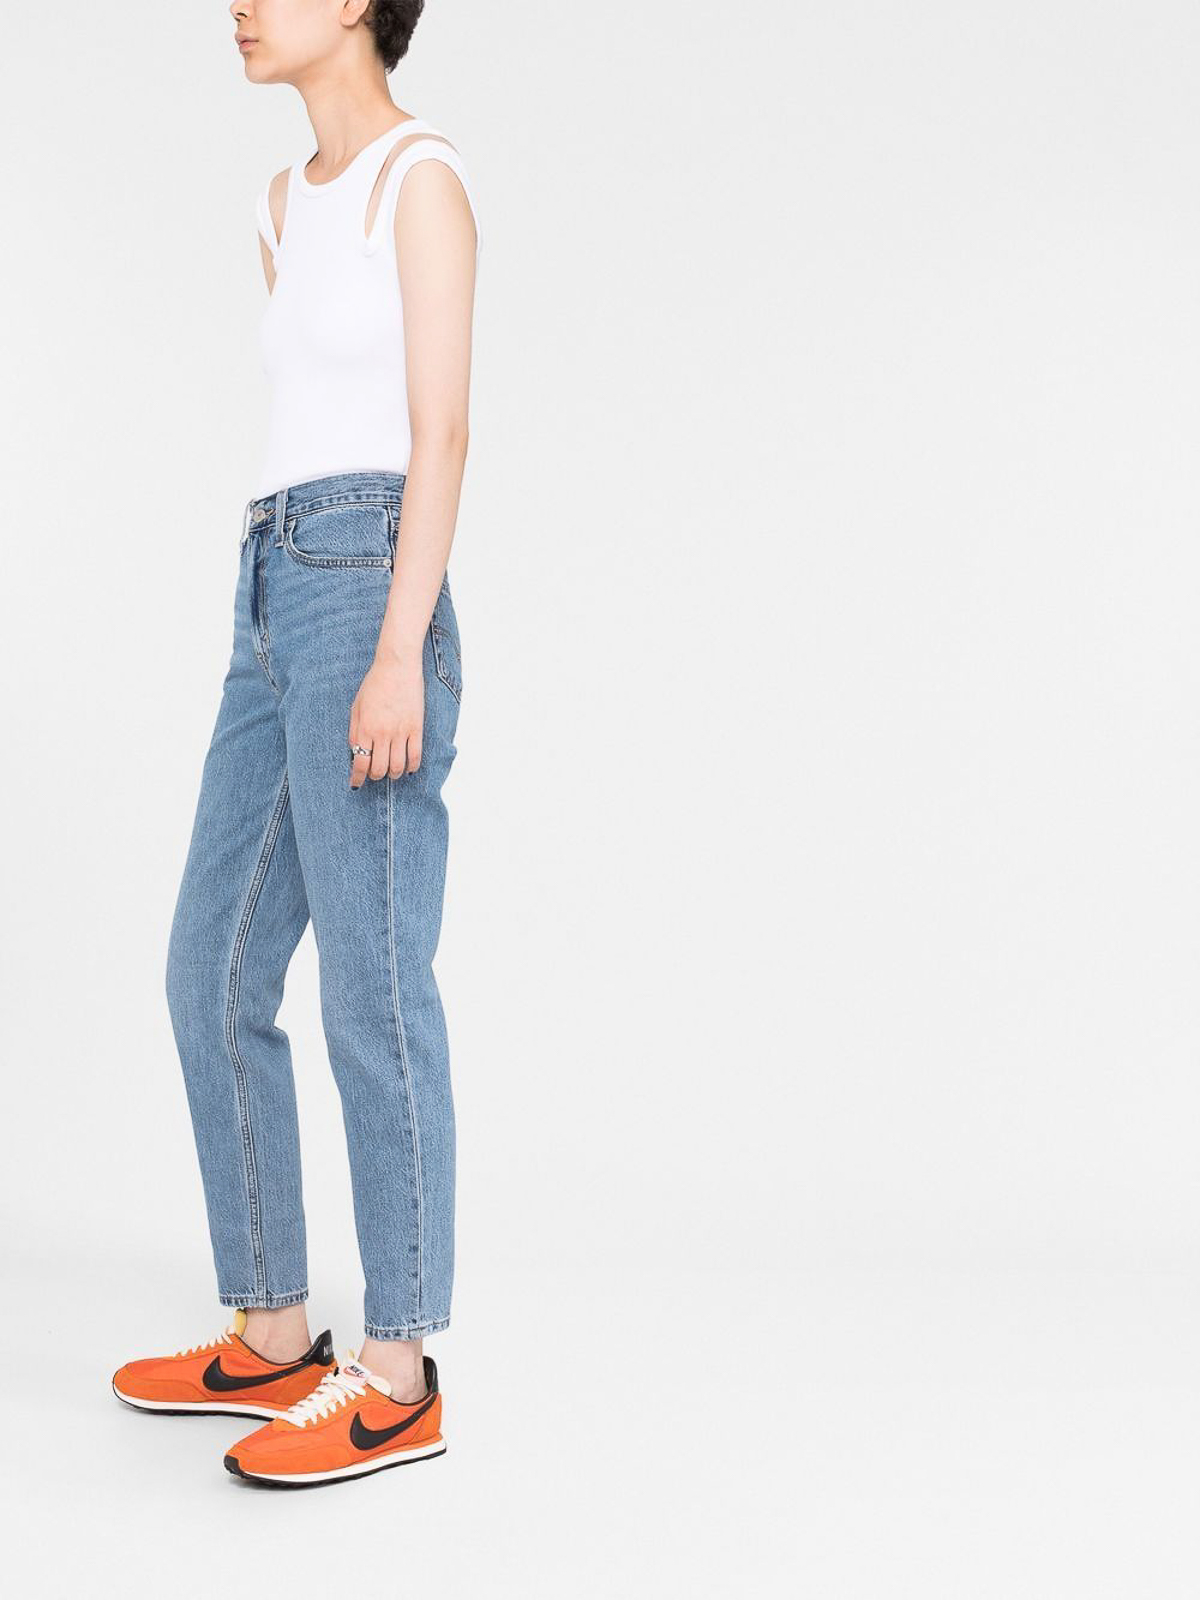 marxistisk stamme Specialisere Straight leg jeans Levi'S - 80s mom denim jeans - A35060002